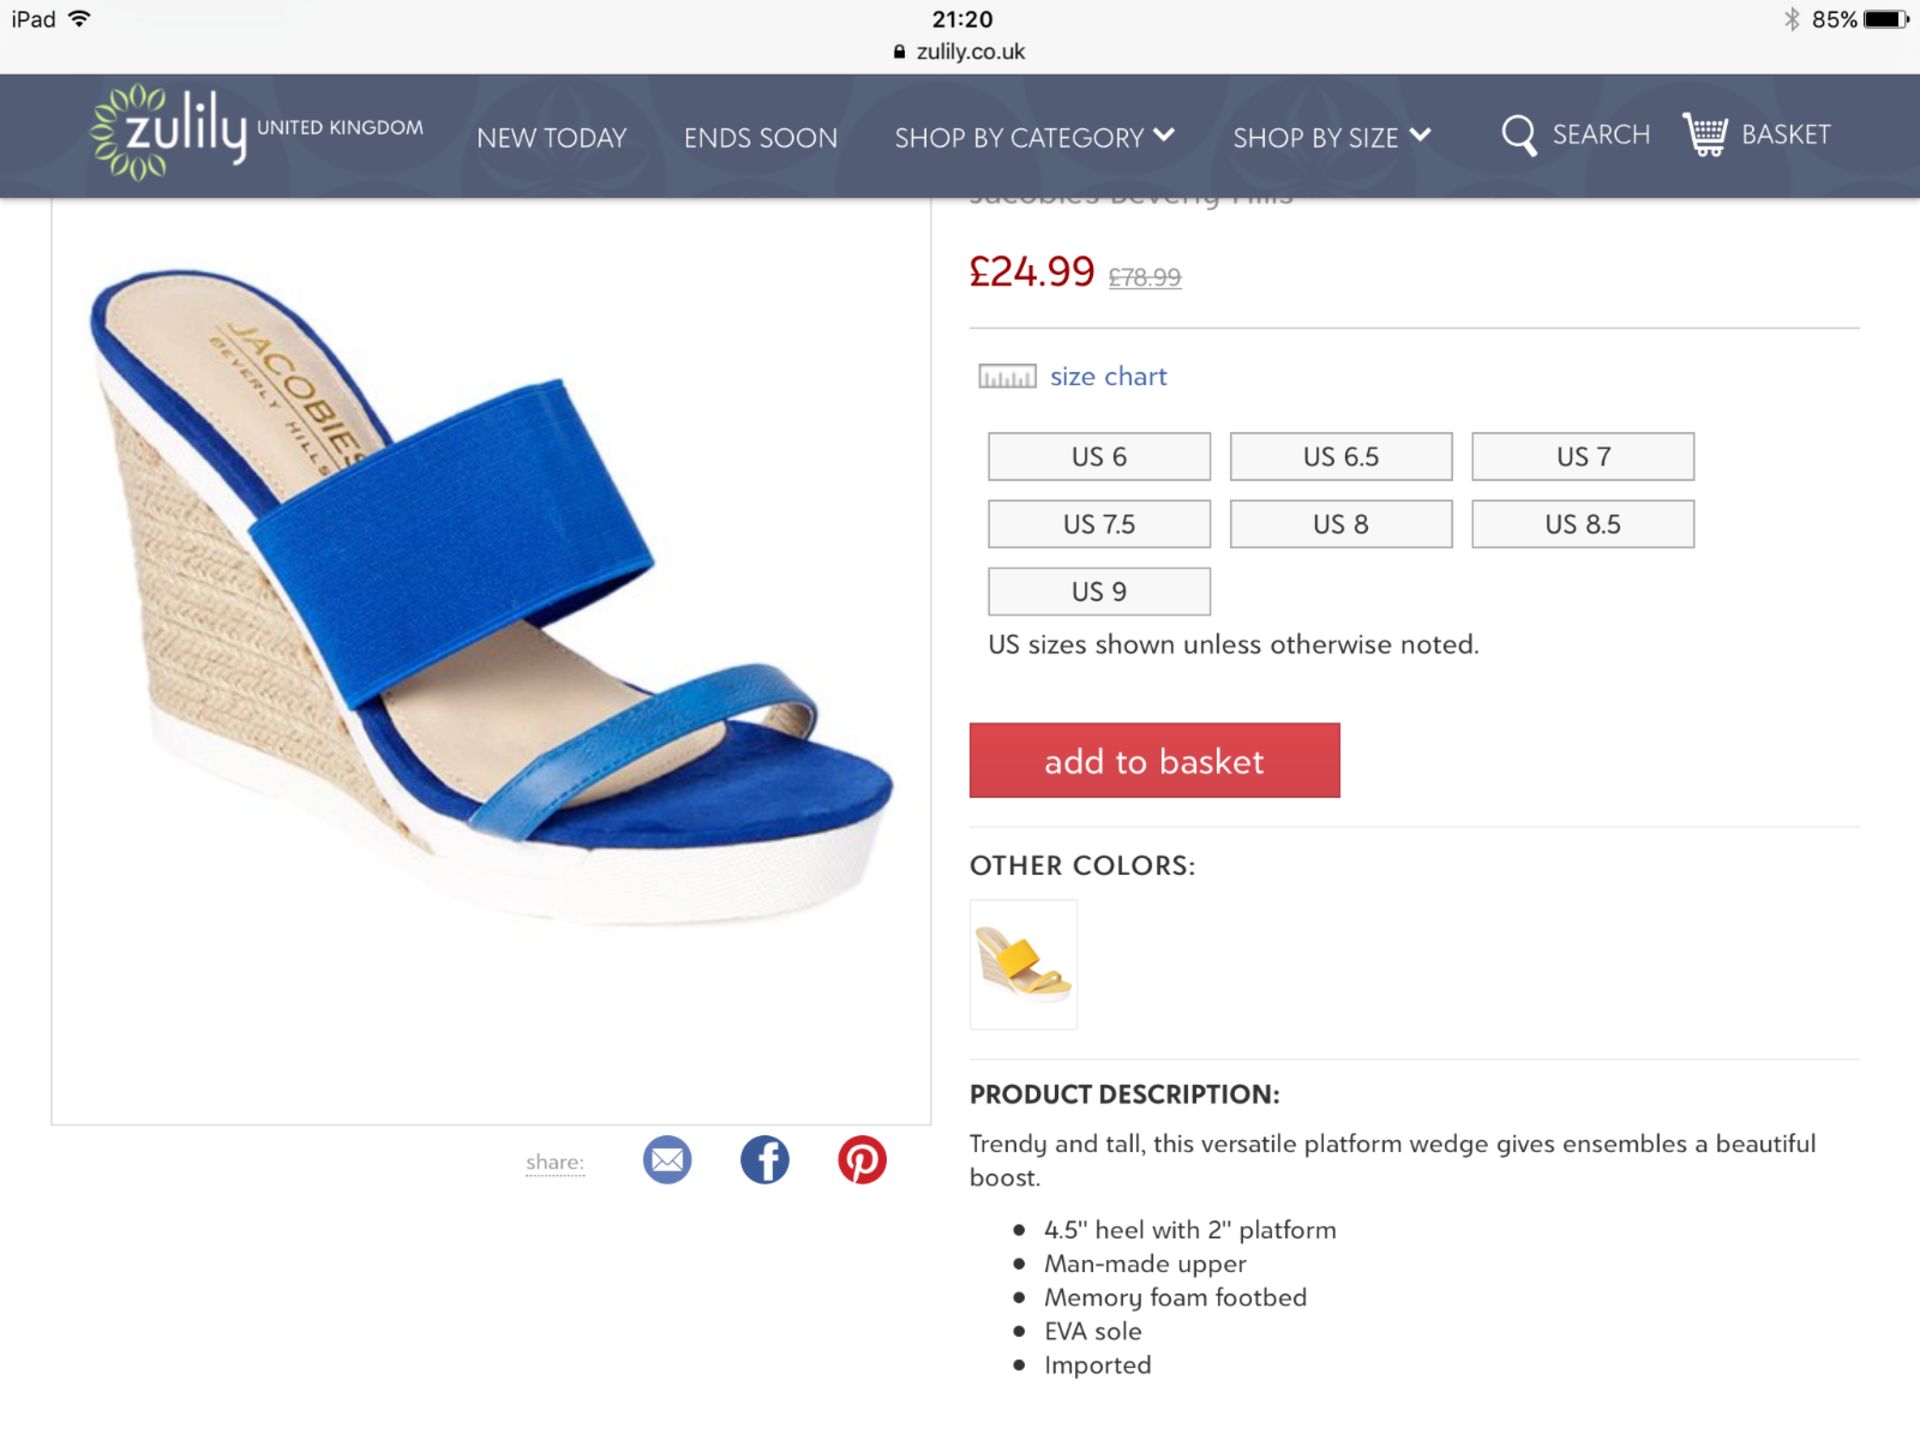 Jacobies Beverly Hills Blue & White Thelma Sandal, Size Uk 3-3.5 Us 5.5 (New With Box) [Ref: - Image 3 of 4